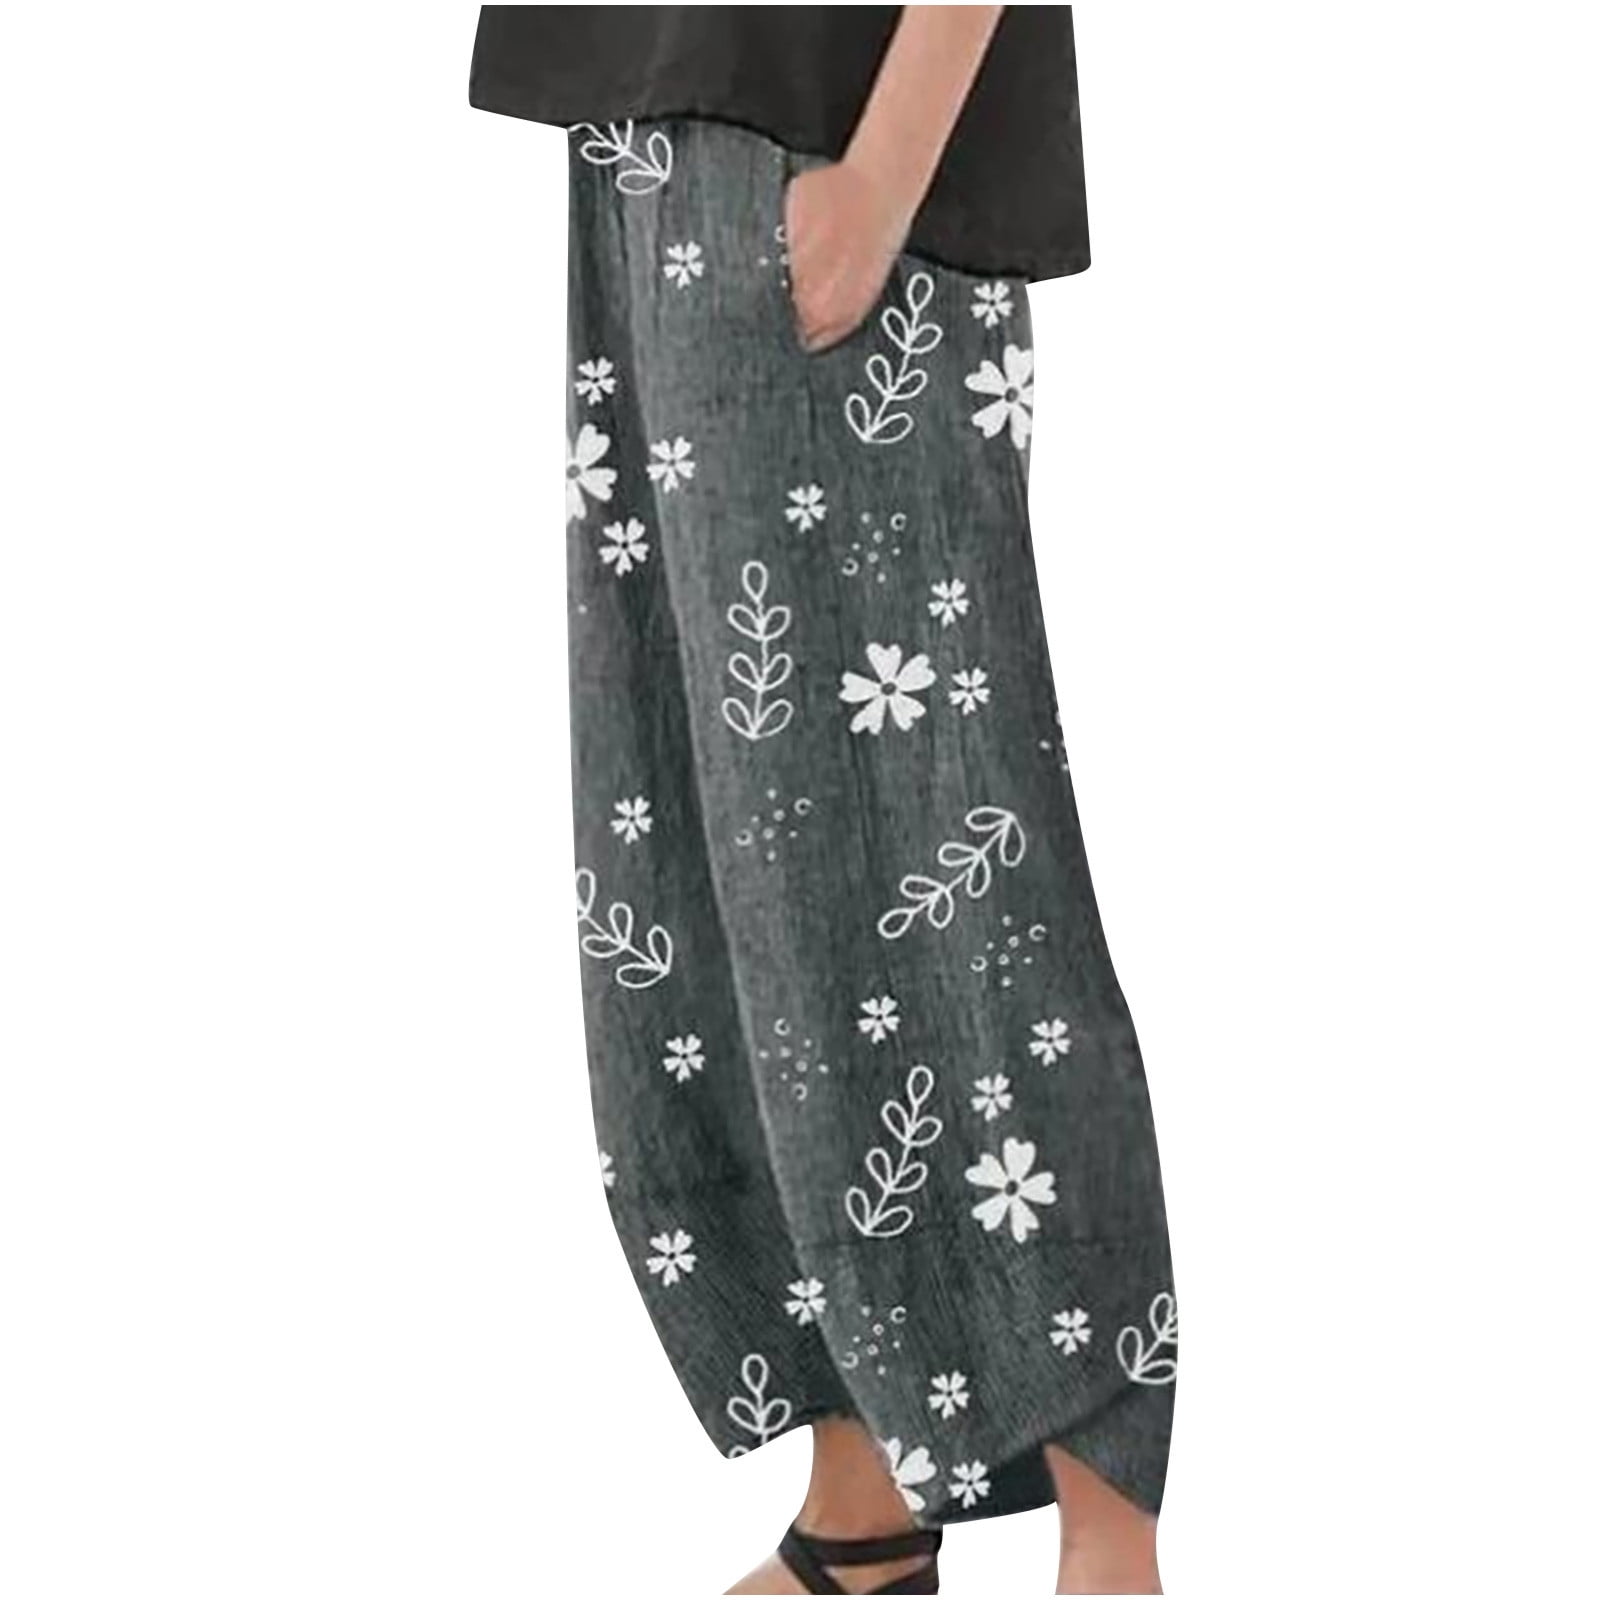 Shop for Harem  Trousers  Womens  online at Lookagain